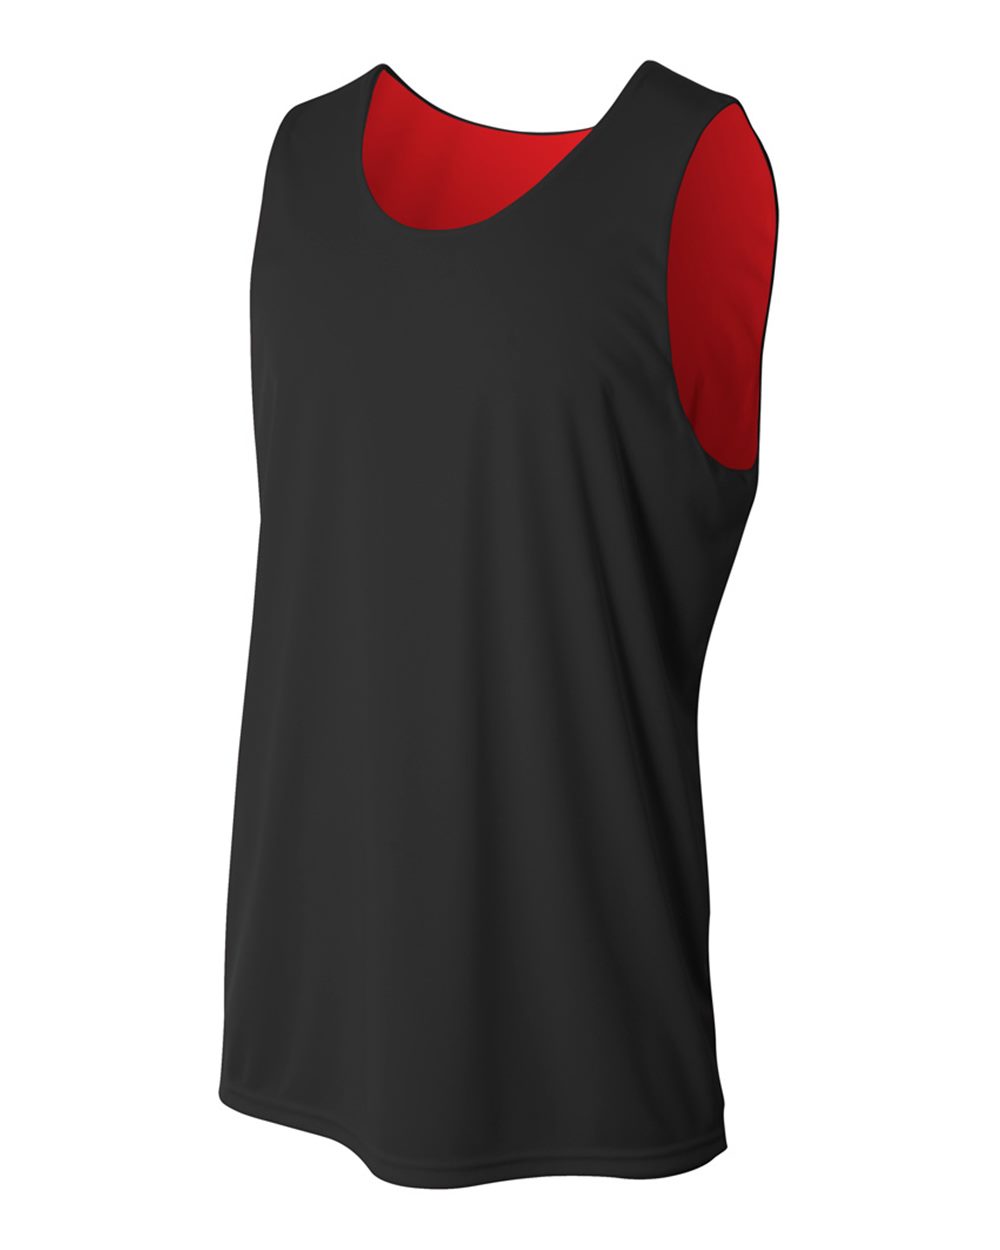 Reversible Dry-Fit Jump Jersey #800 